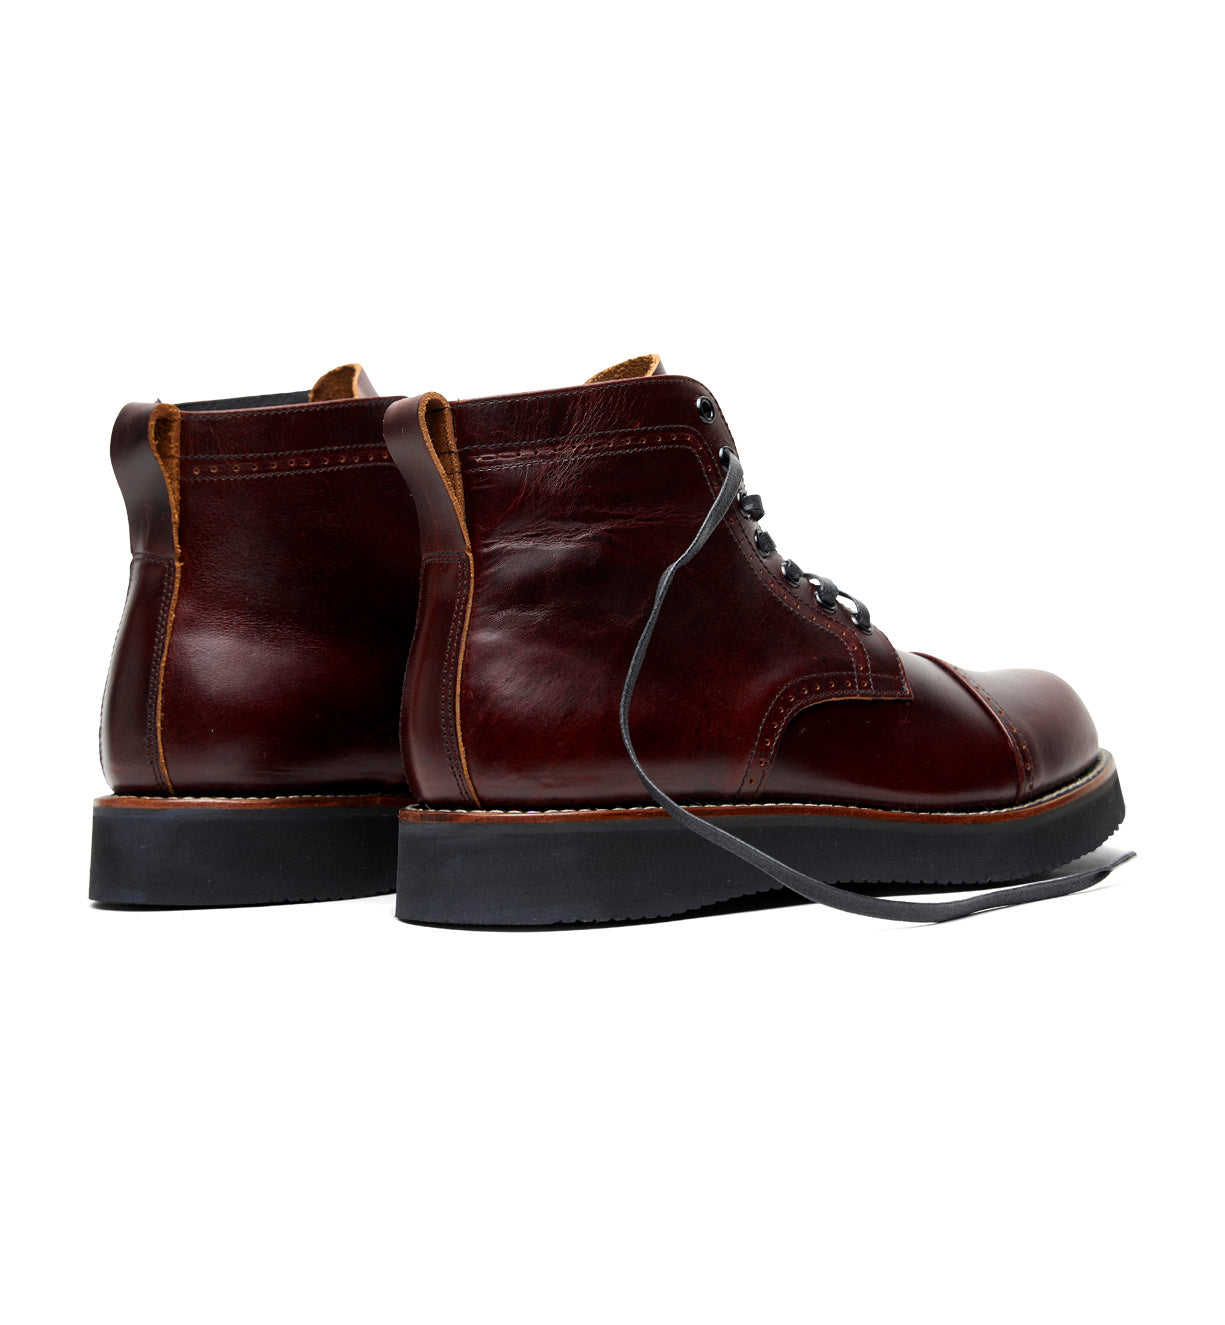 A pair of men's Broken Homme Aaron Boots in burgundy leather with a cap toe silhouette.